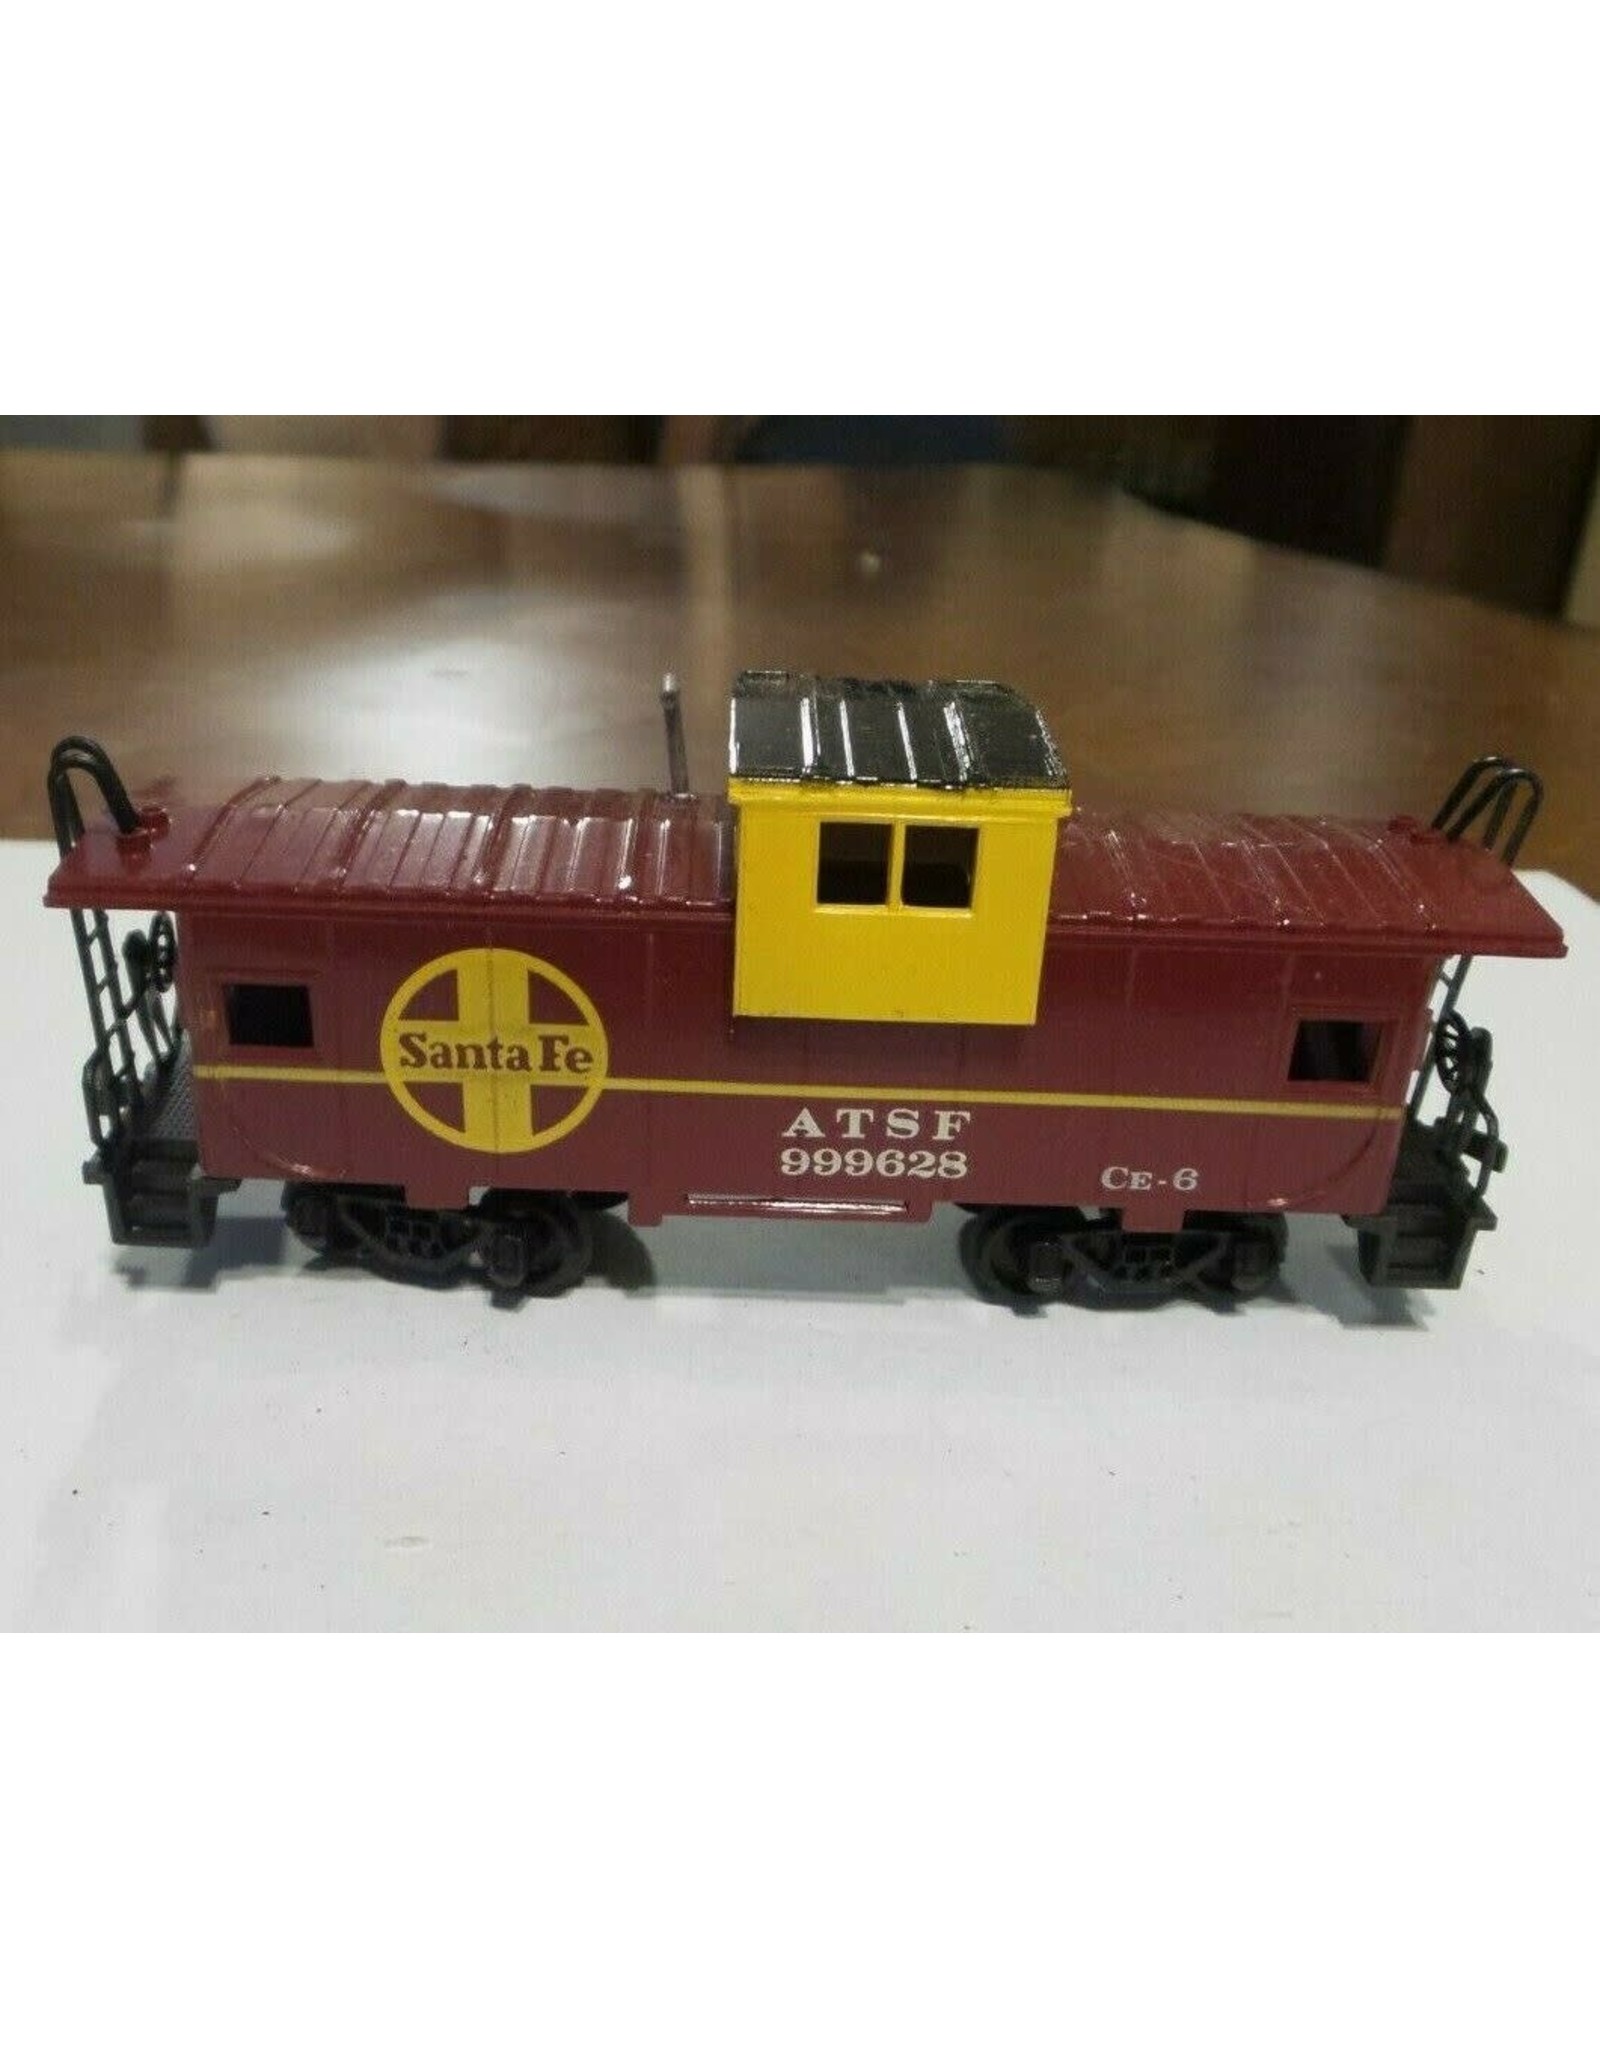 Bachmann HO Scale Santa Fe ATSF $999628 CE-6 Caboose Freight Car in Excellent Condition metal wheels and couplers